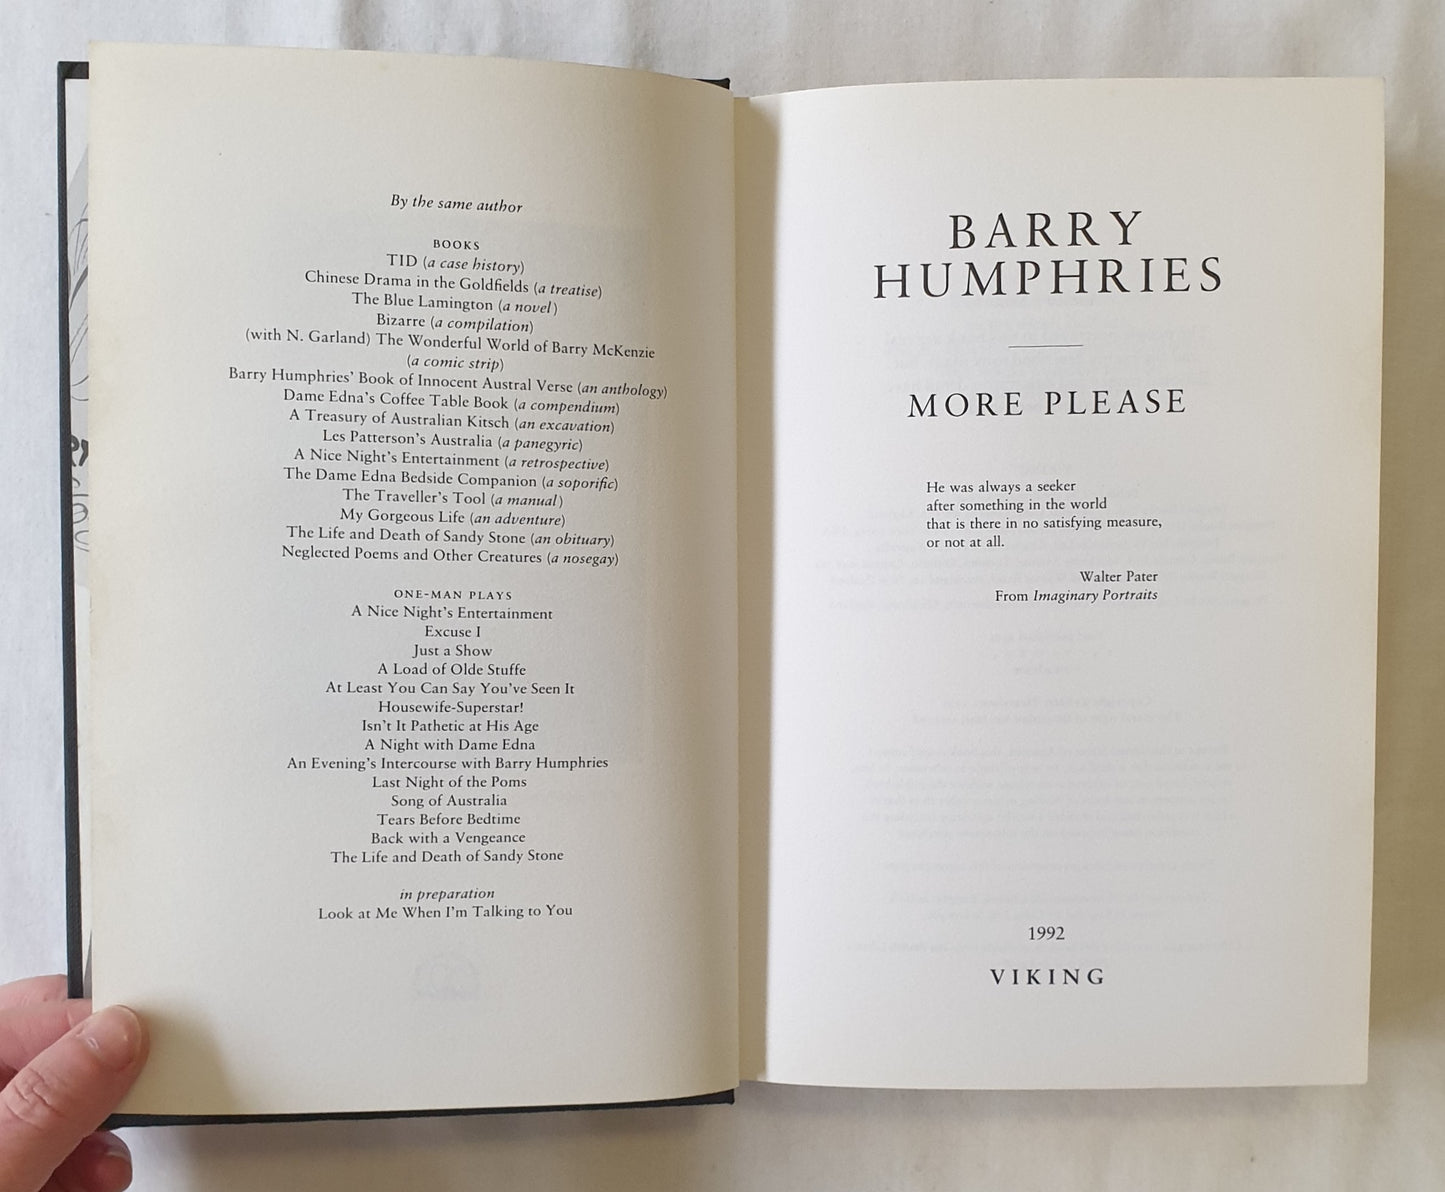 More Please by Barry Humphries